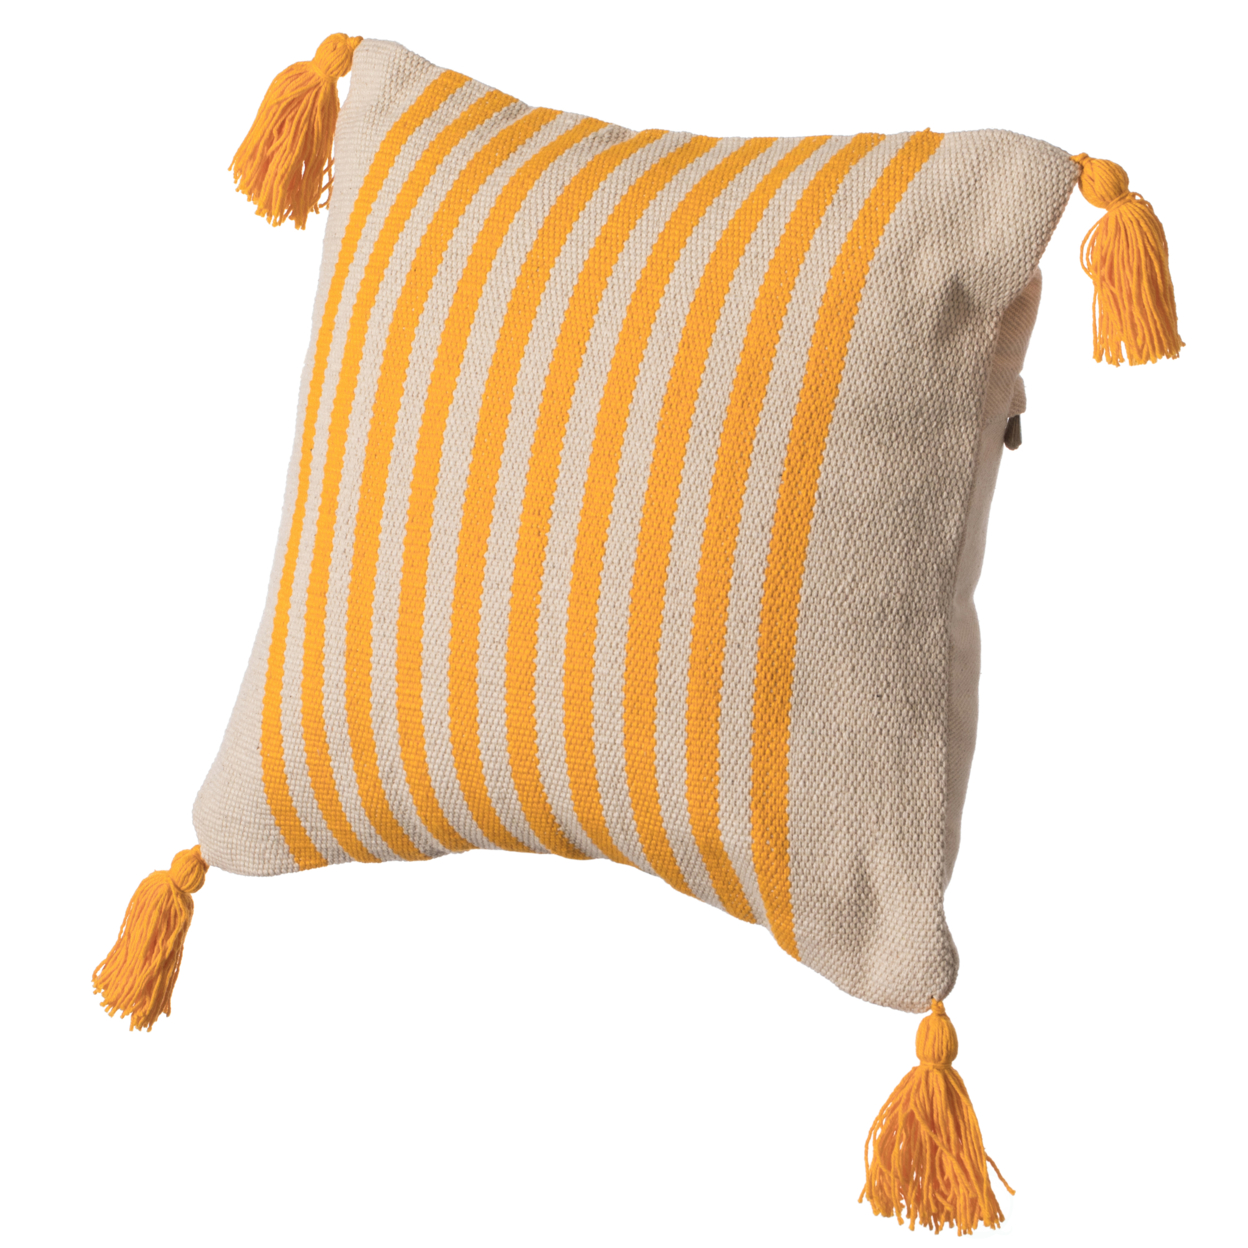 16 Handwoven Cotton Throw Pillow Cover With Striped Lines, Black - Yellow With Cushion